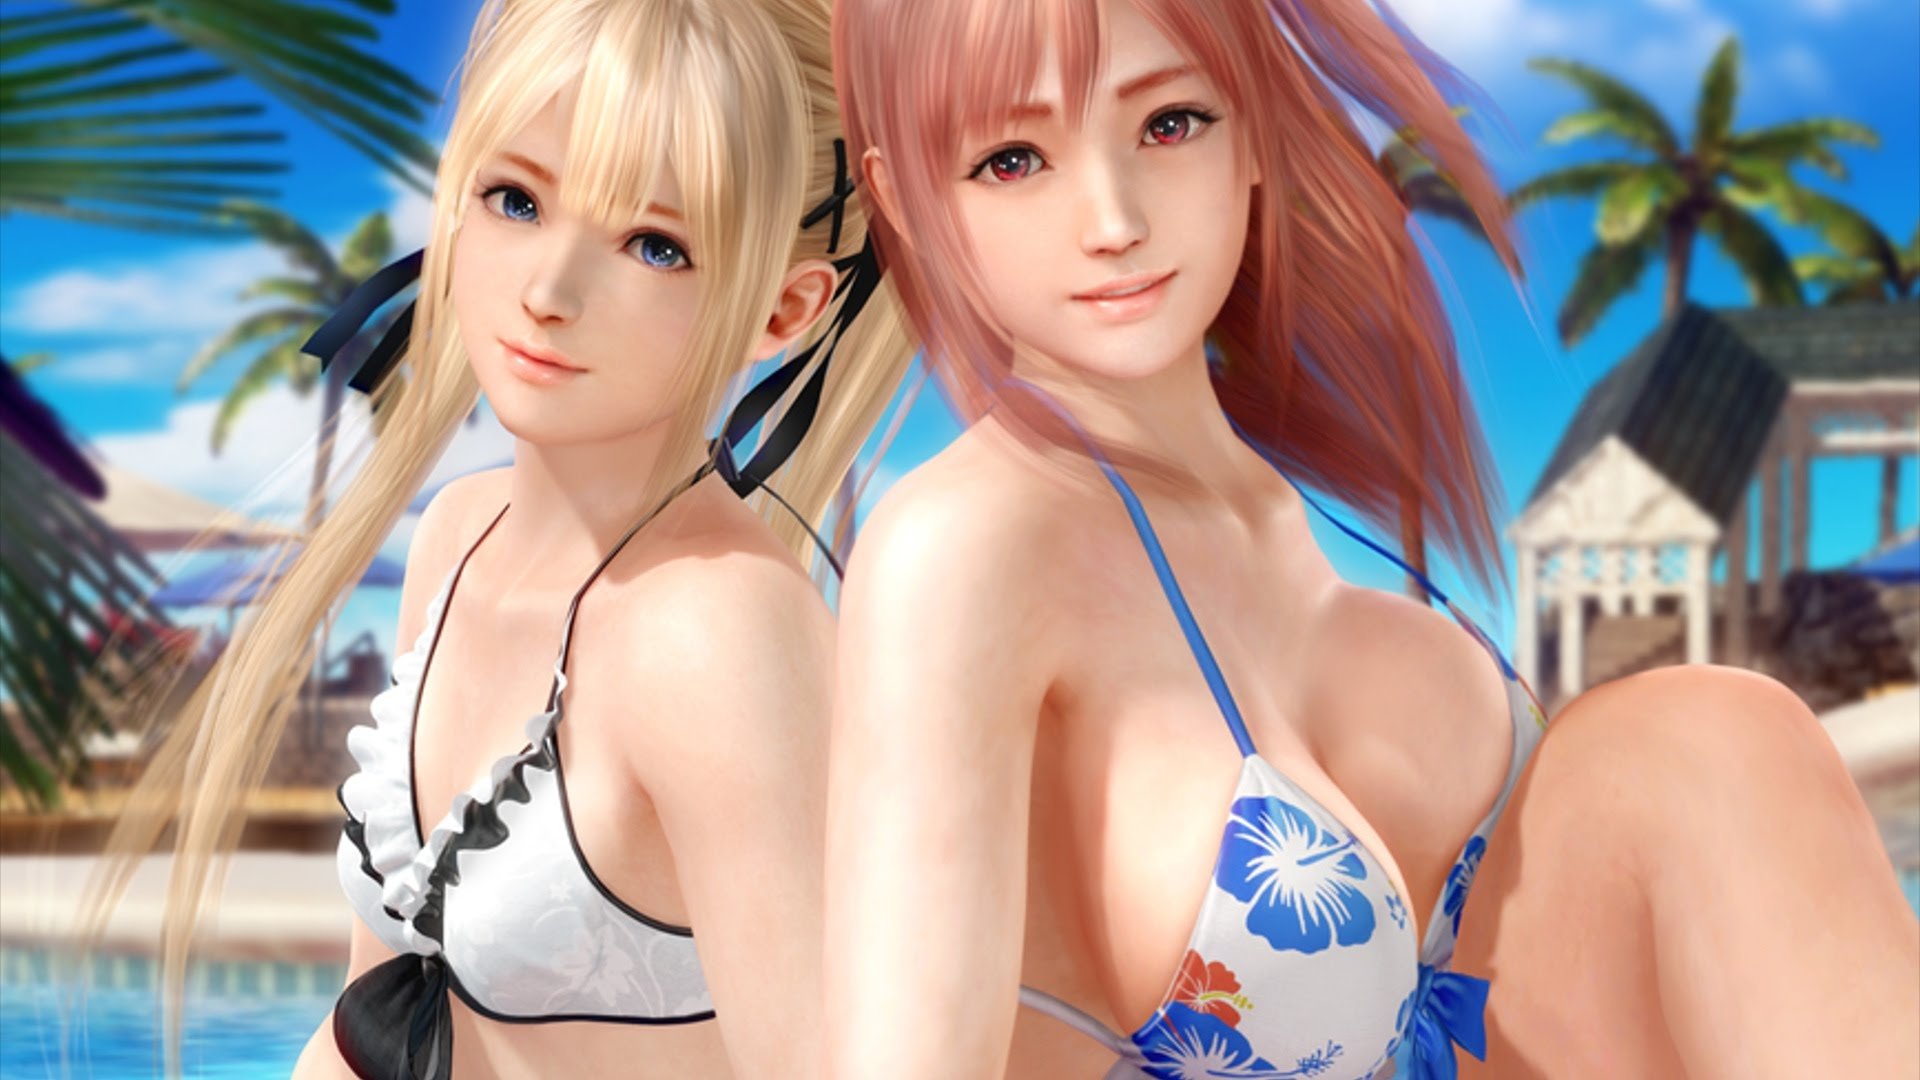 Dead Or Alive Xtreme 3s New Trailer Is Even More Unsafe For Work Than 